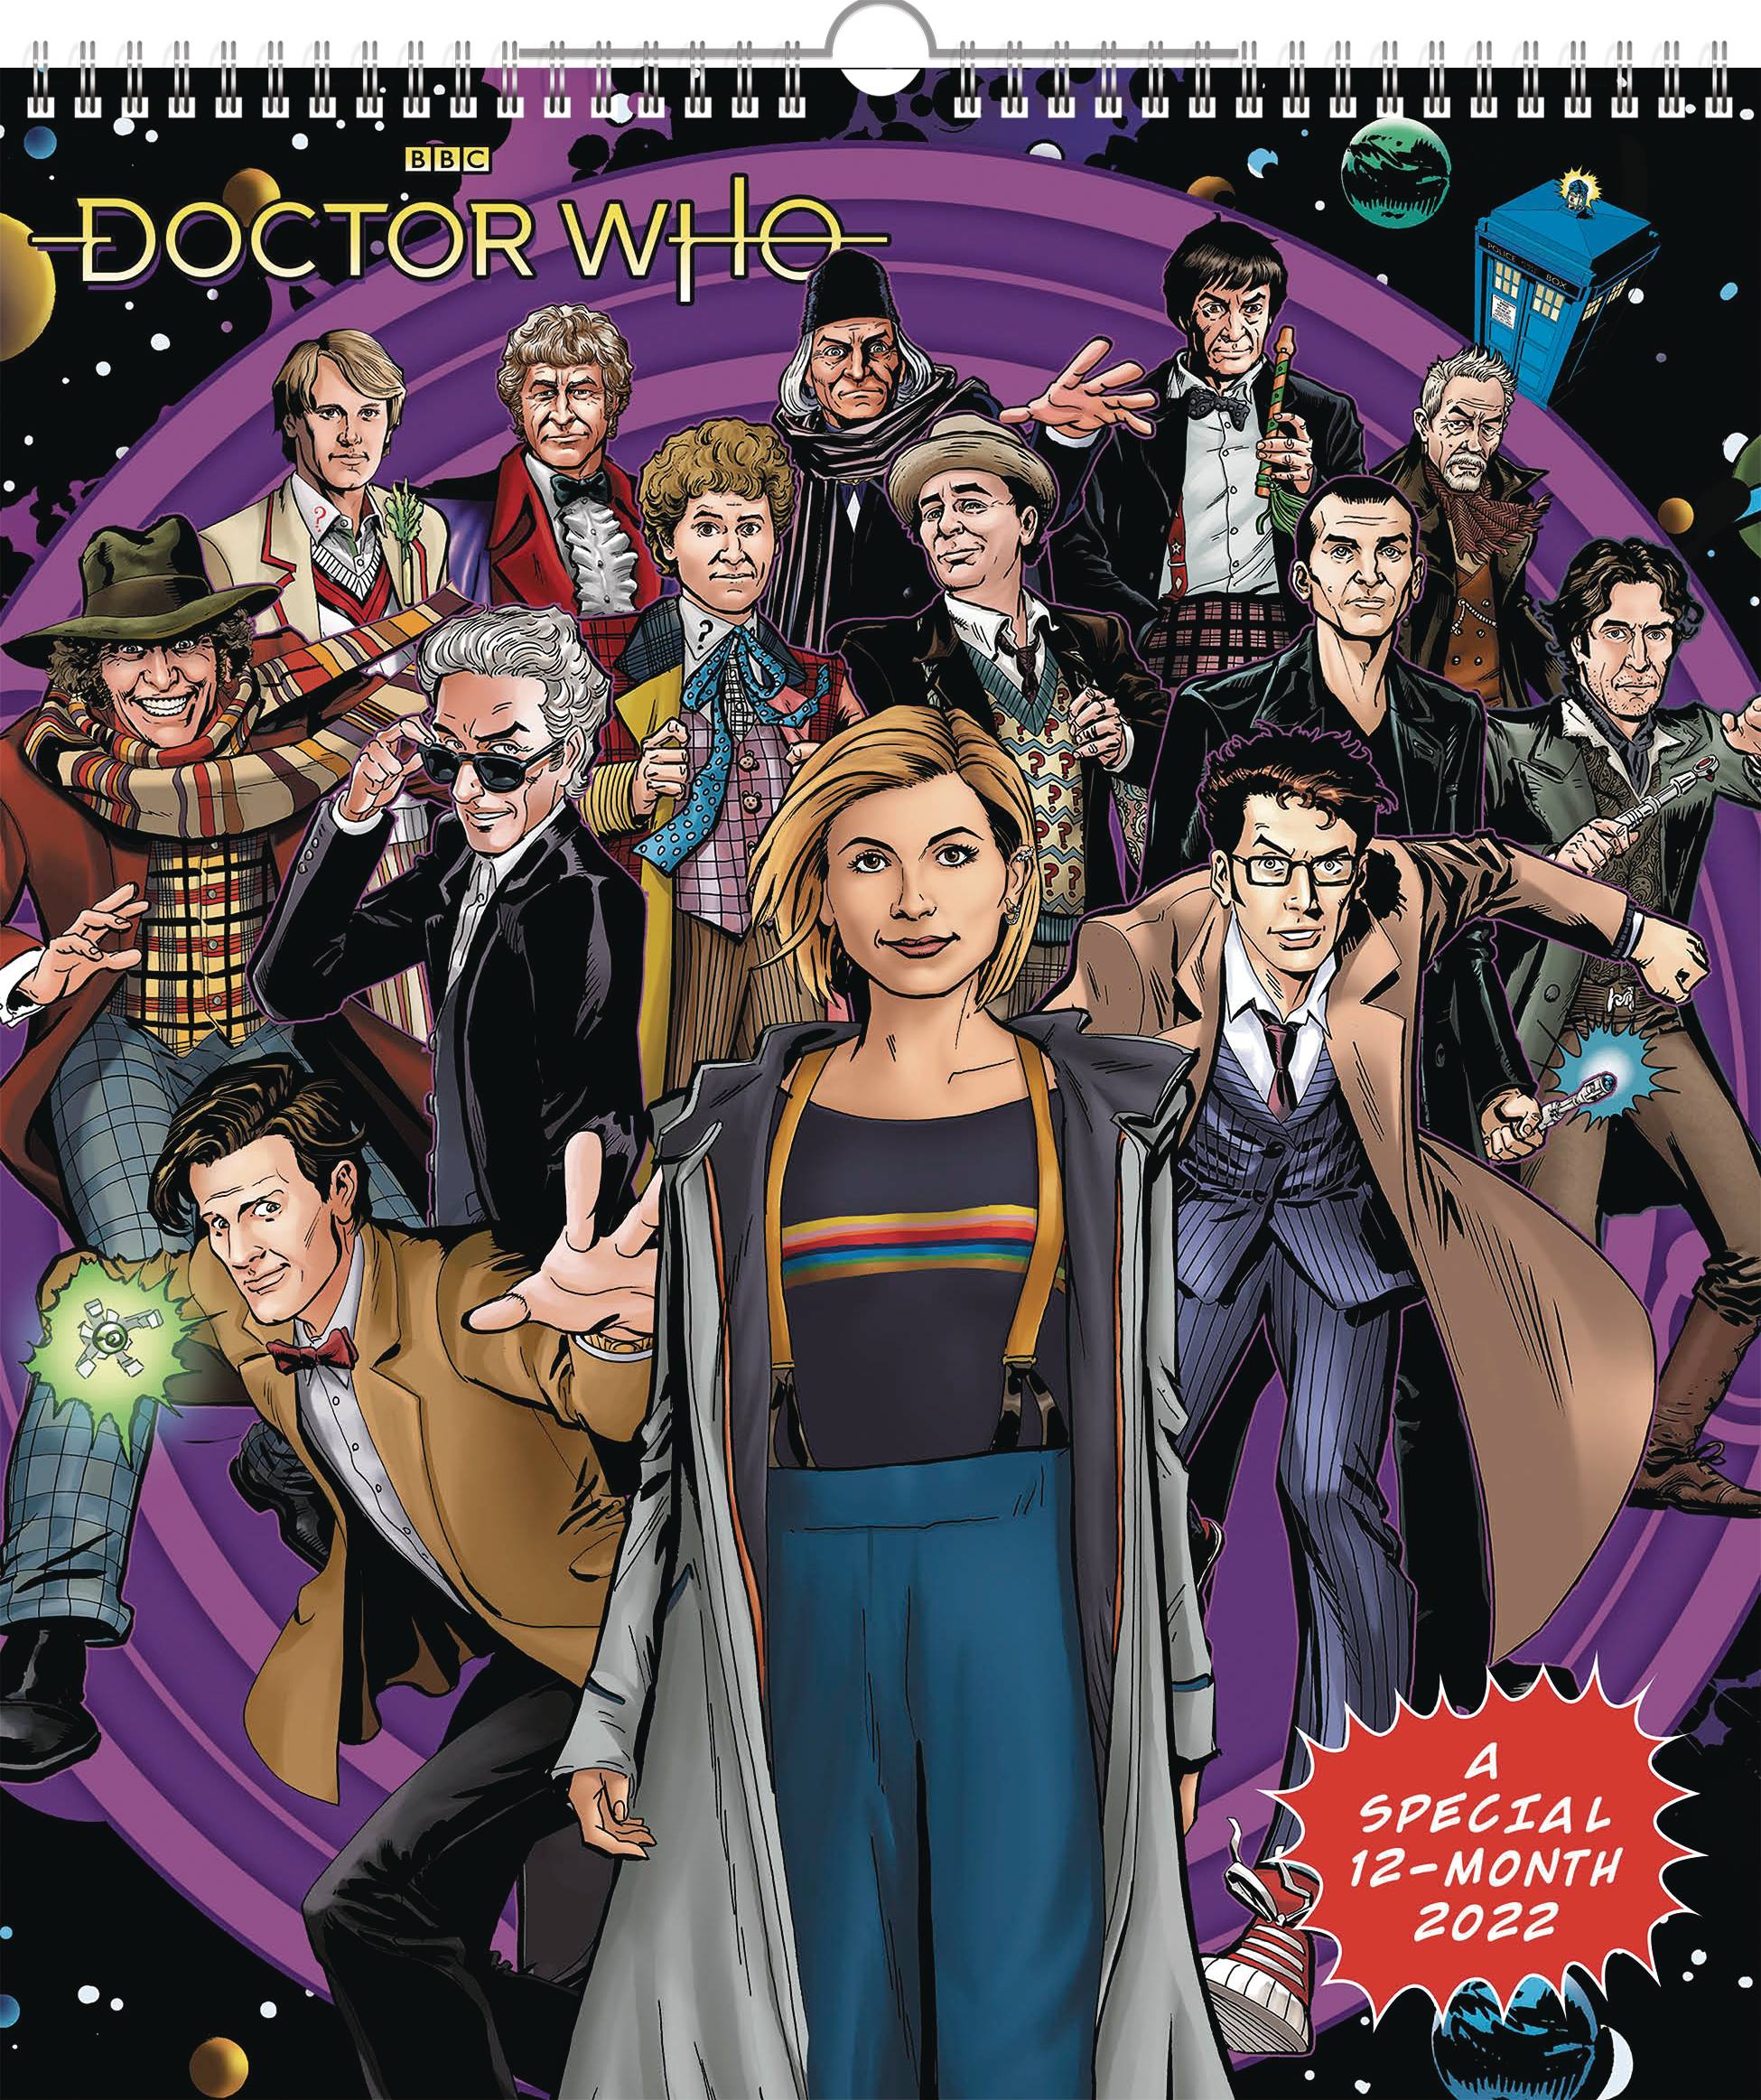 DOCTOR WHO SPECIAL ED 2022 WALL CALENDAR